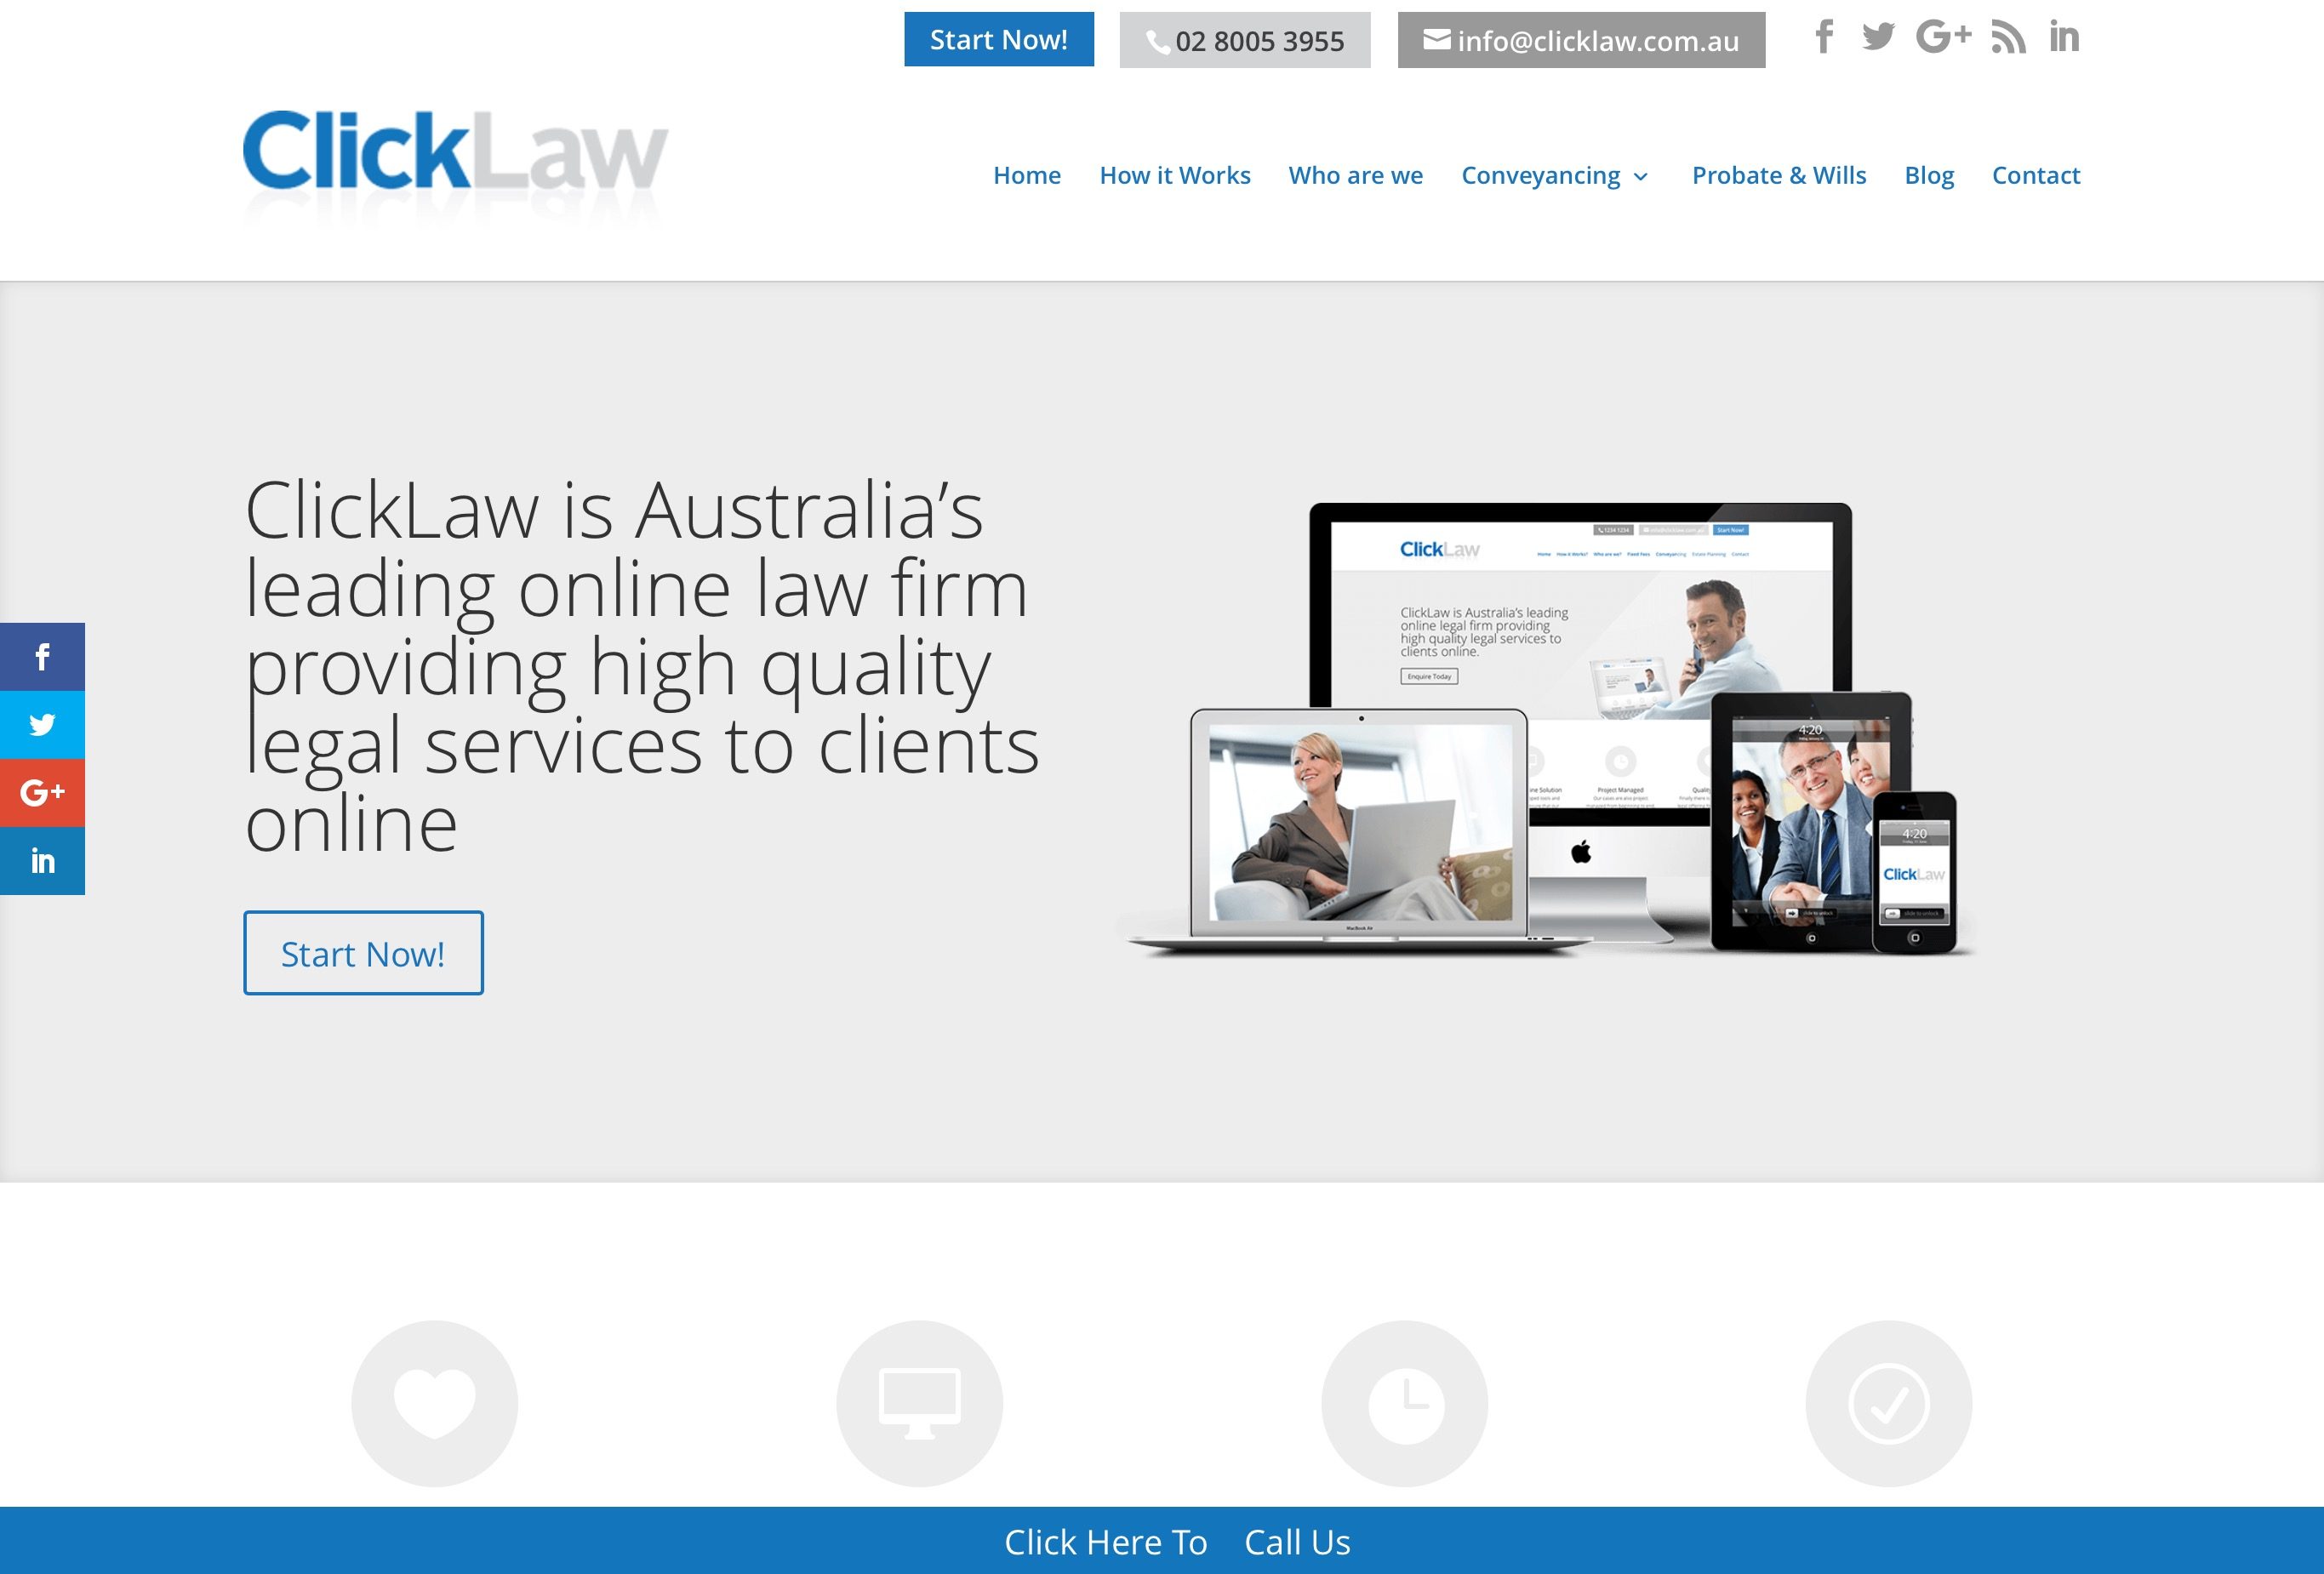 ClickLaw